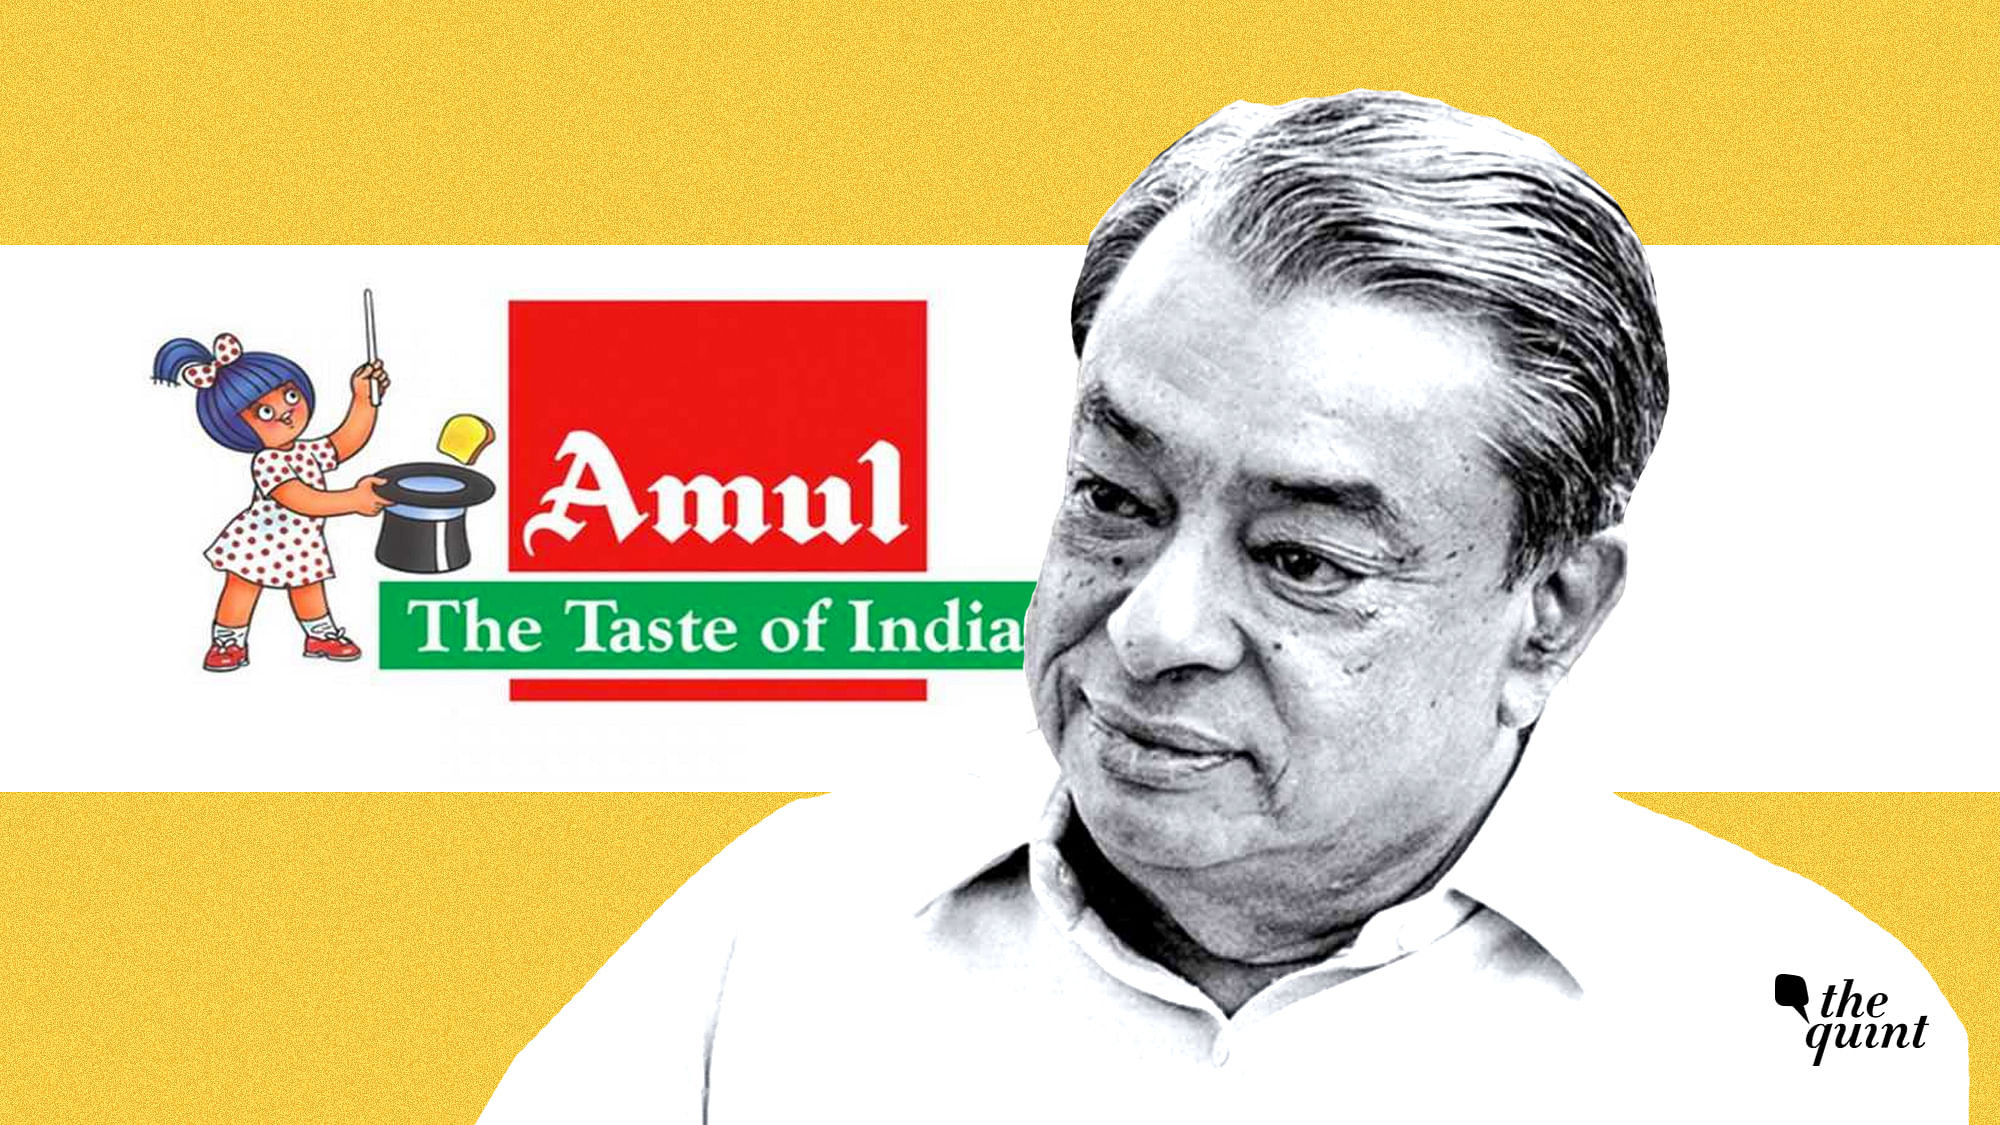 Verghese Kurien, late founder-chairman of the National Dairy Development Board (NDDB) and the Gujarat Cooperative Milk Marketing Federation.